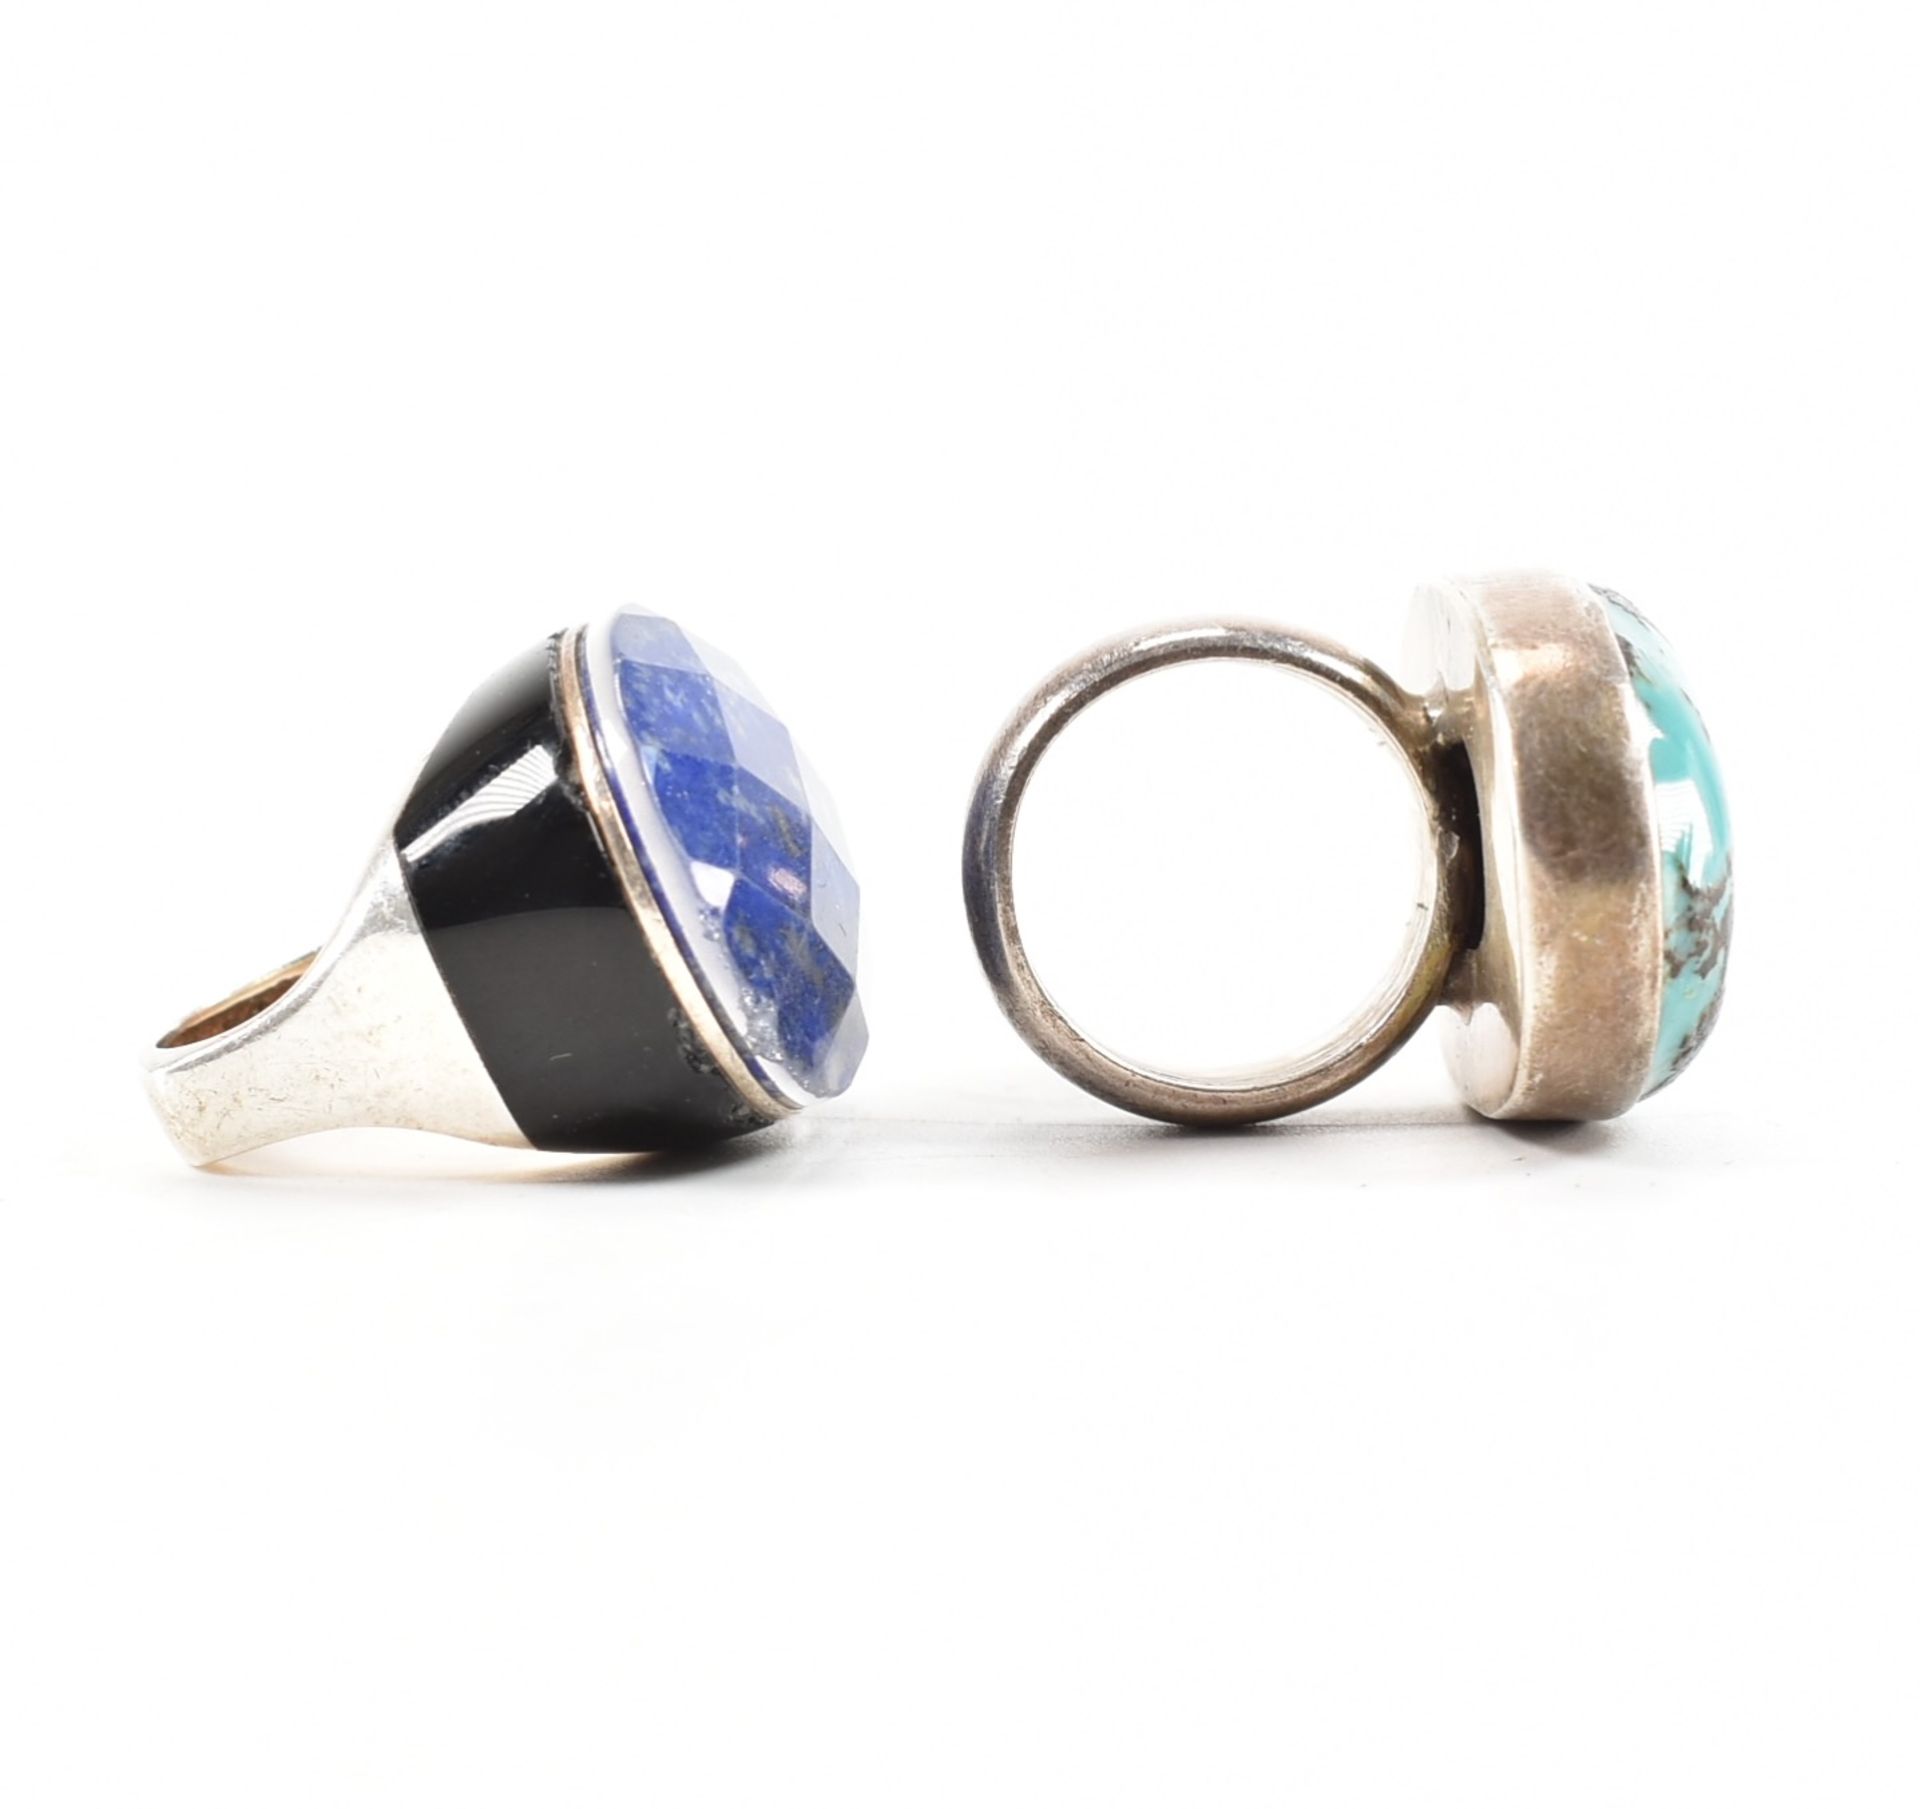 TWO 925 SILVER & STONE SET DRESS RINGS - Image 4 of 7